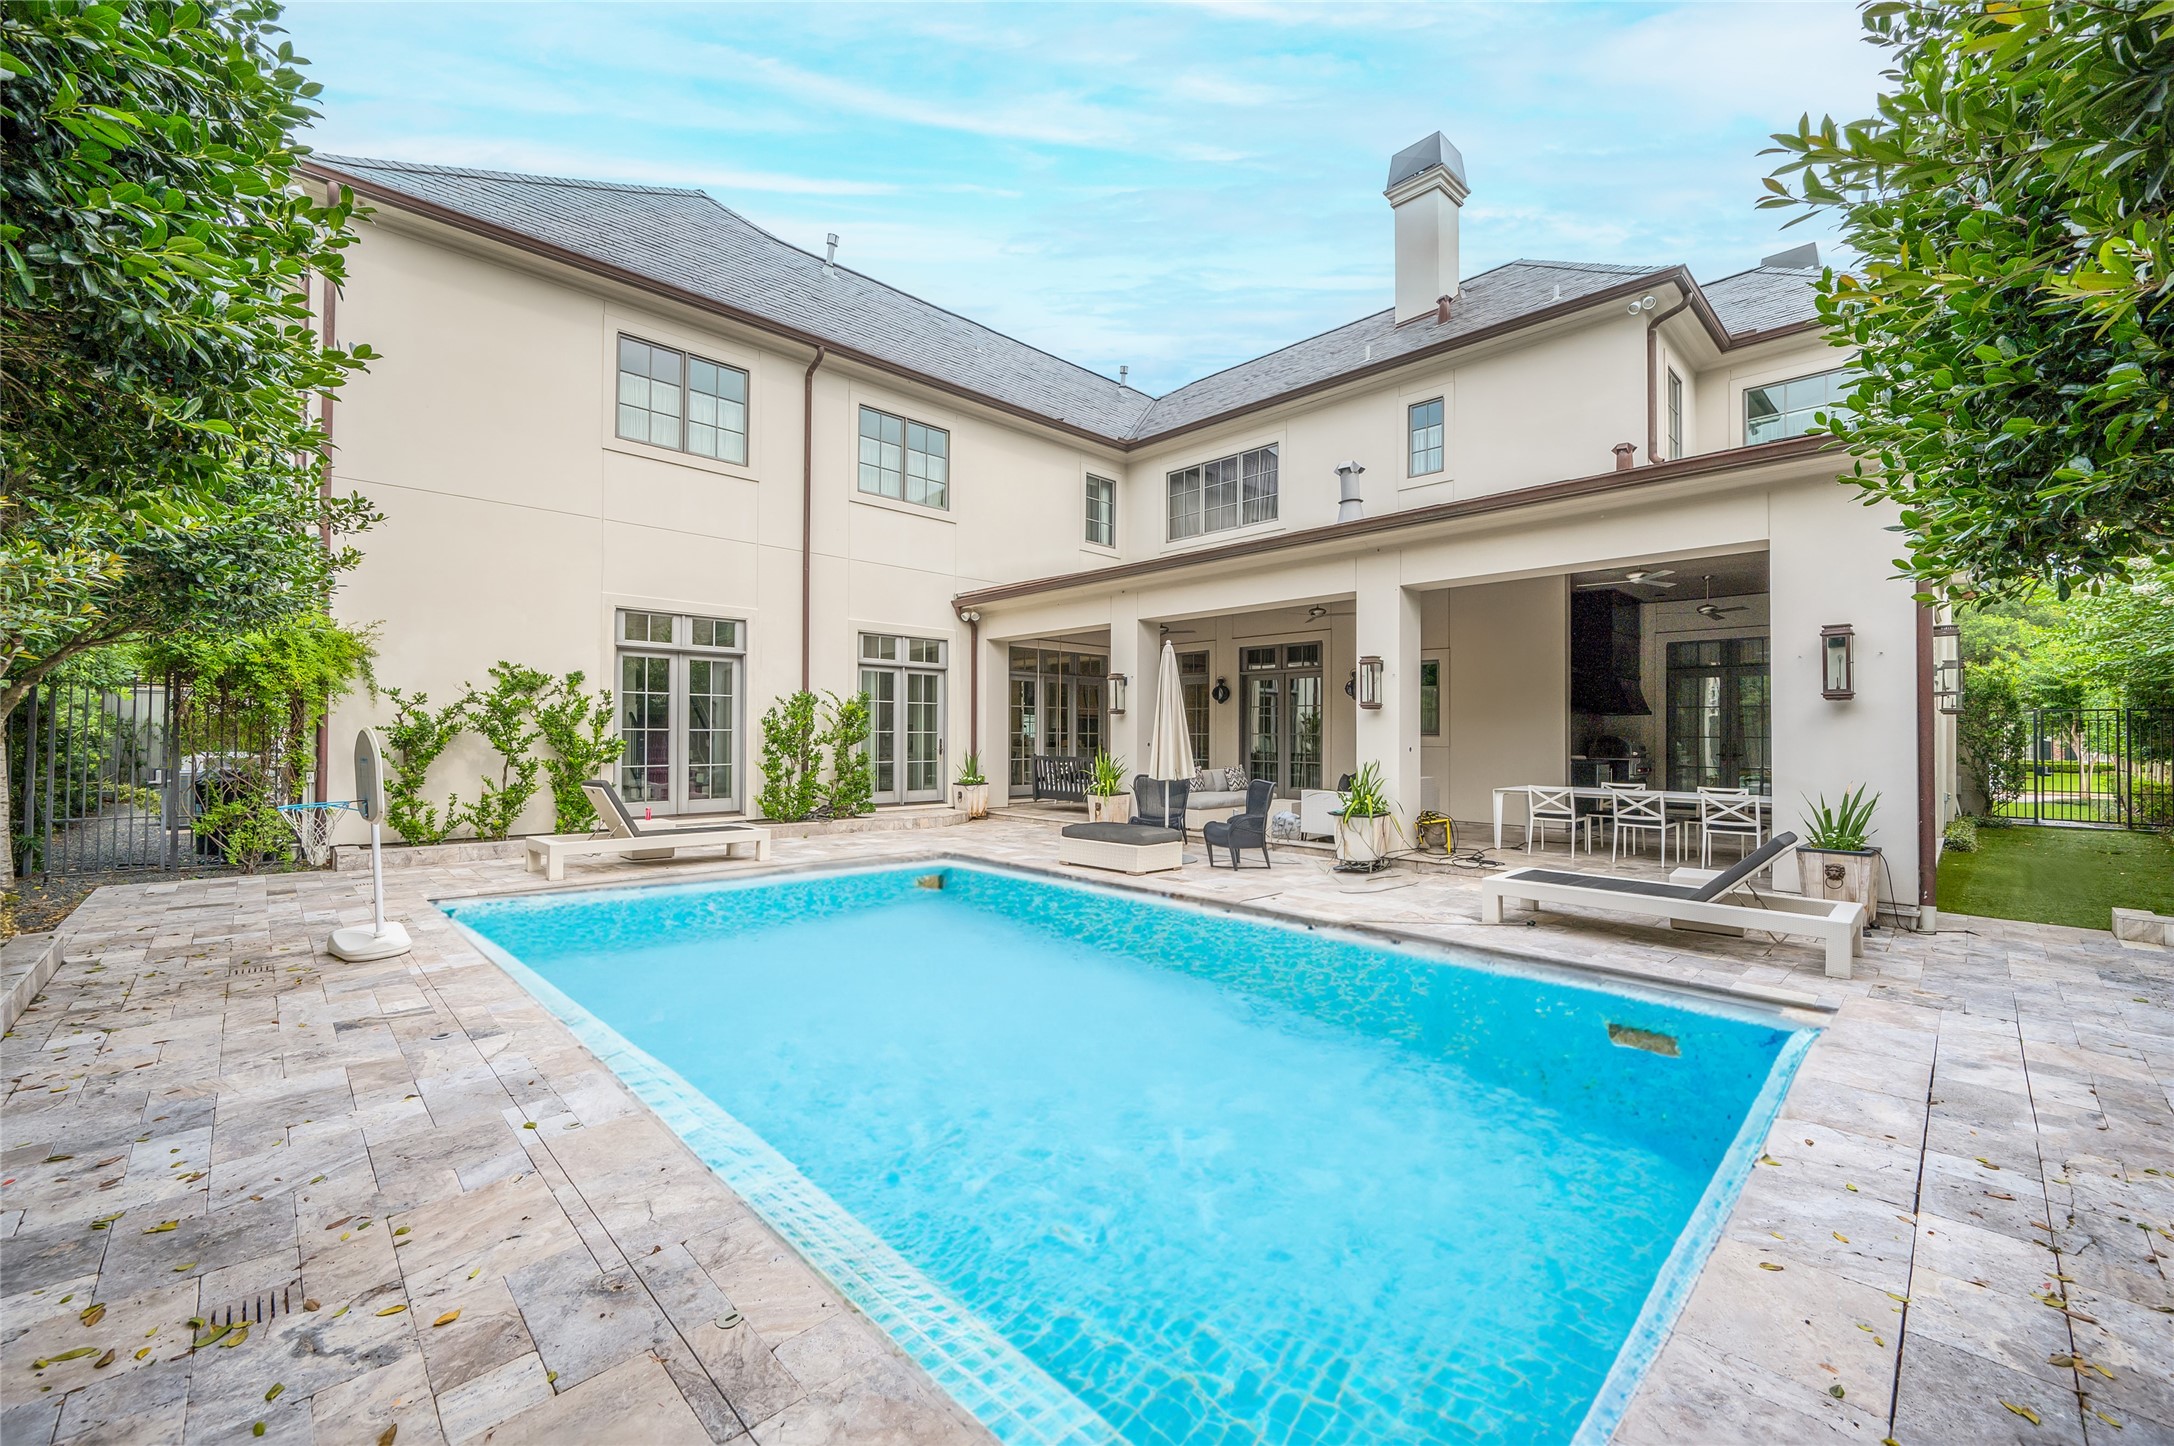 [Rear Elevation]
A wide view of the pool, open patios, and expansive loggia.